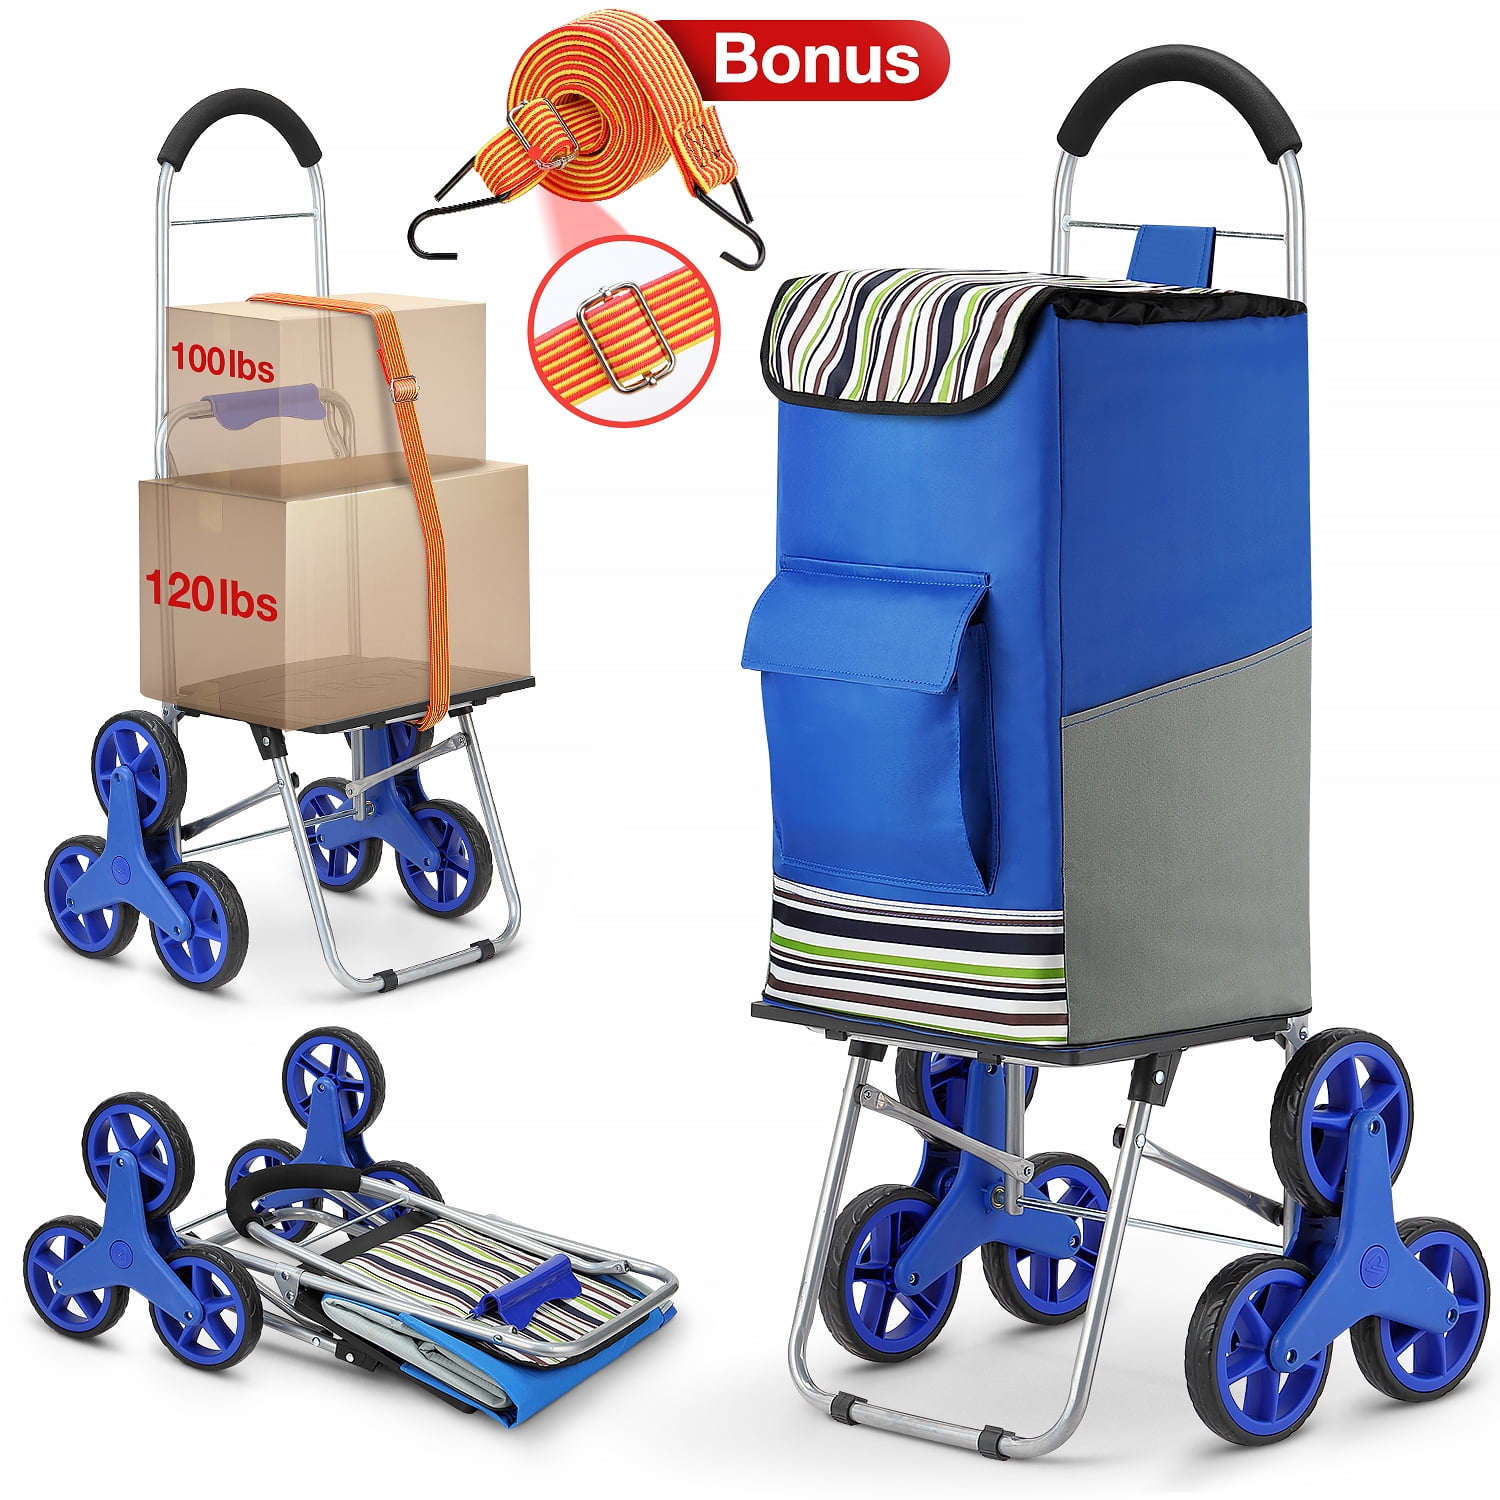 Details about   Folding Shopping Cart Portable Stair Climbing Utility Cart with Swivel Wheel 